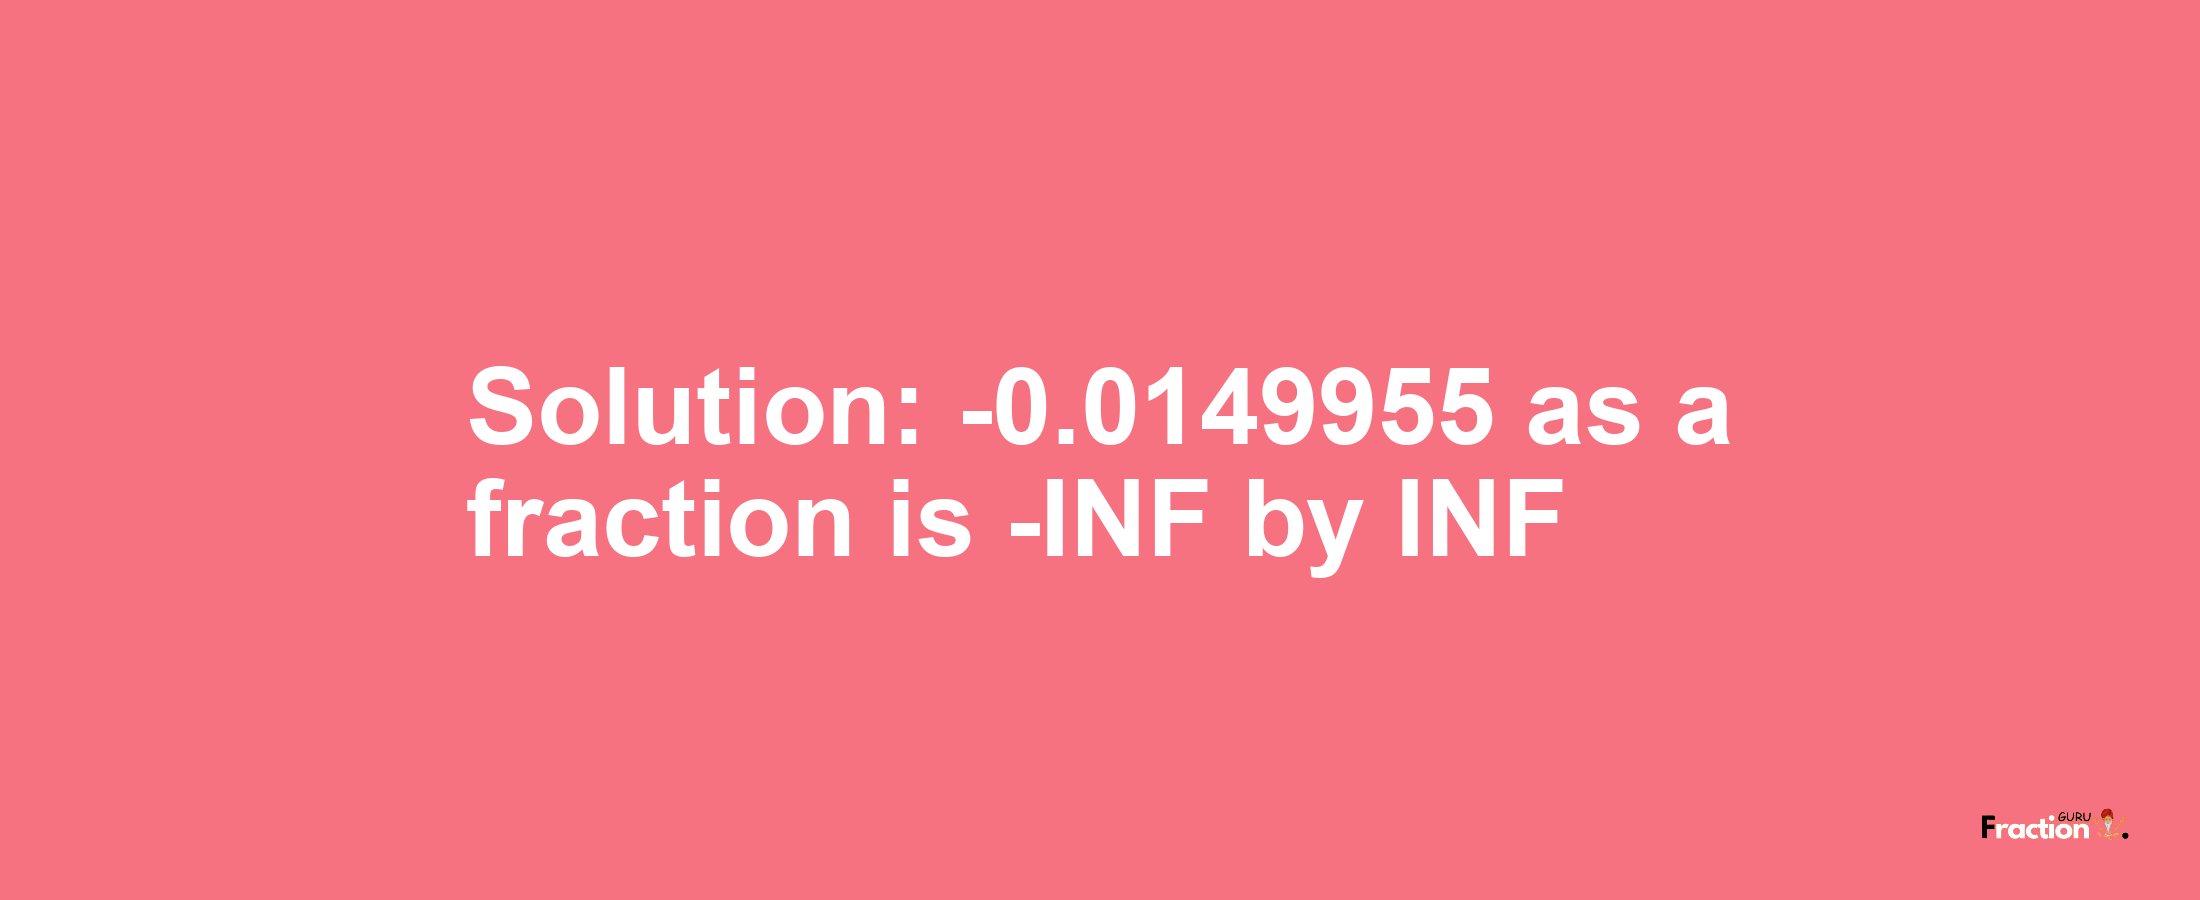 Solution:-0.0149955 as a fraction is -INF/INF